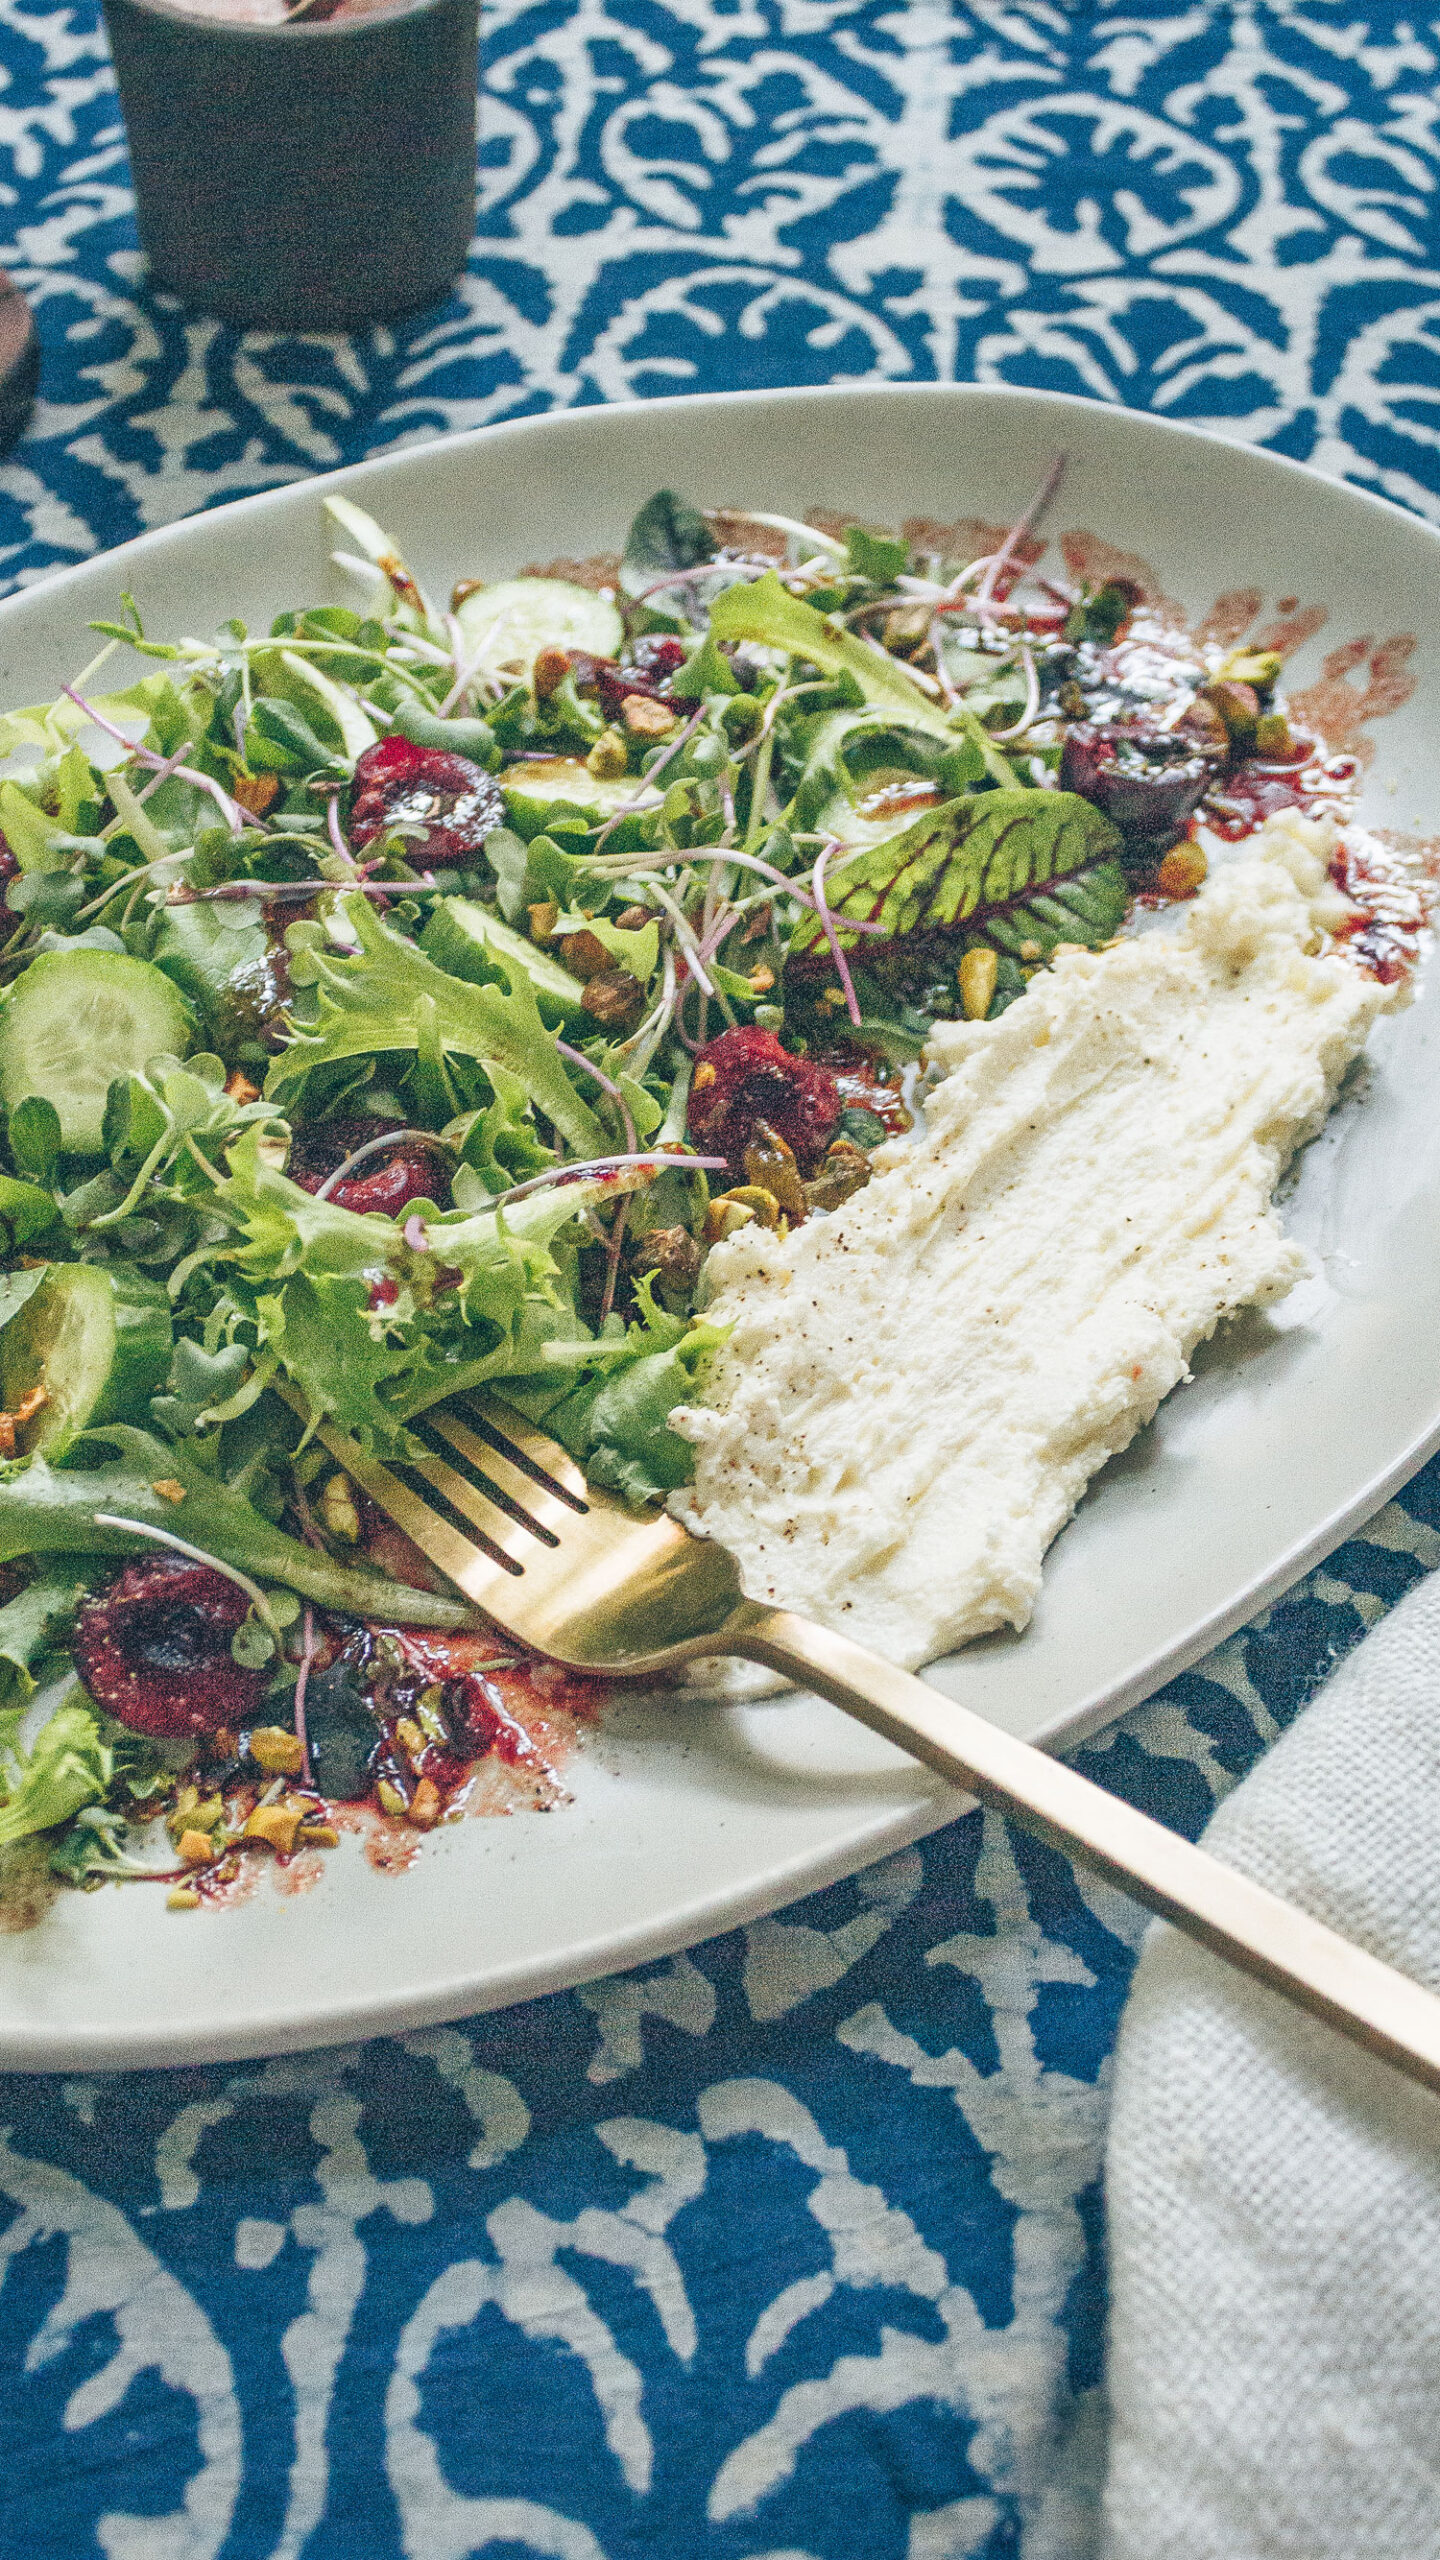 Mixed arugula salad on a plate with fresh cherries, pistachios, and whipped feta.